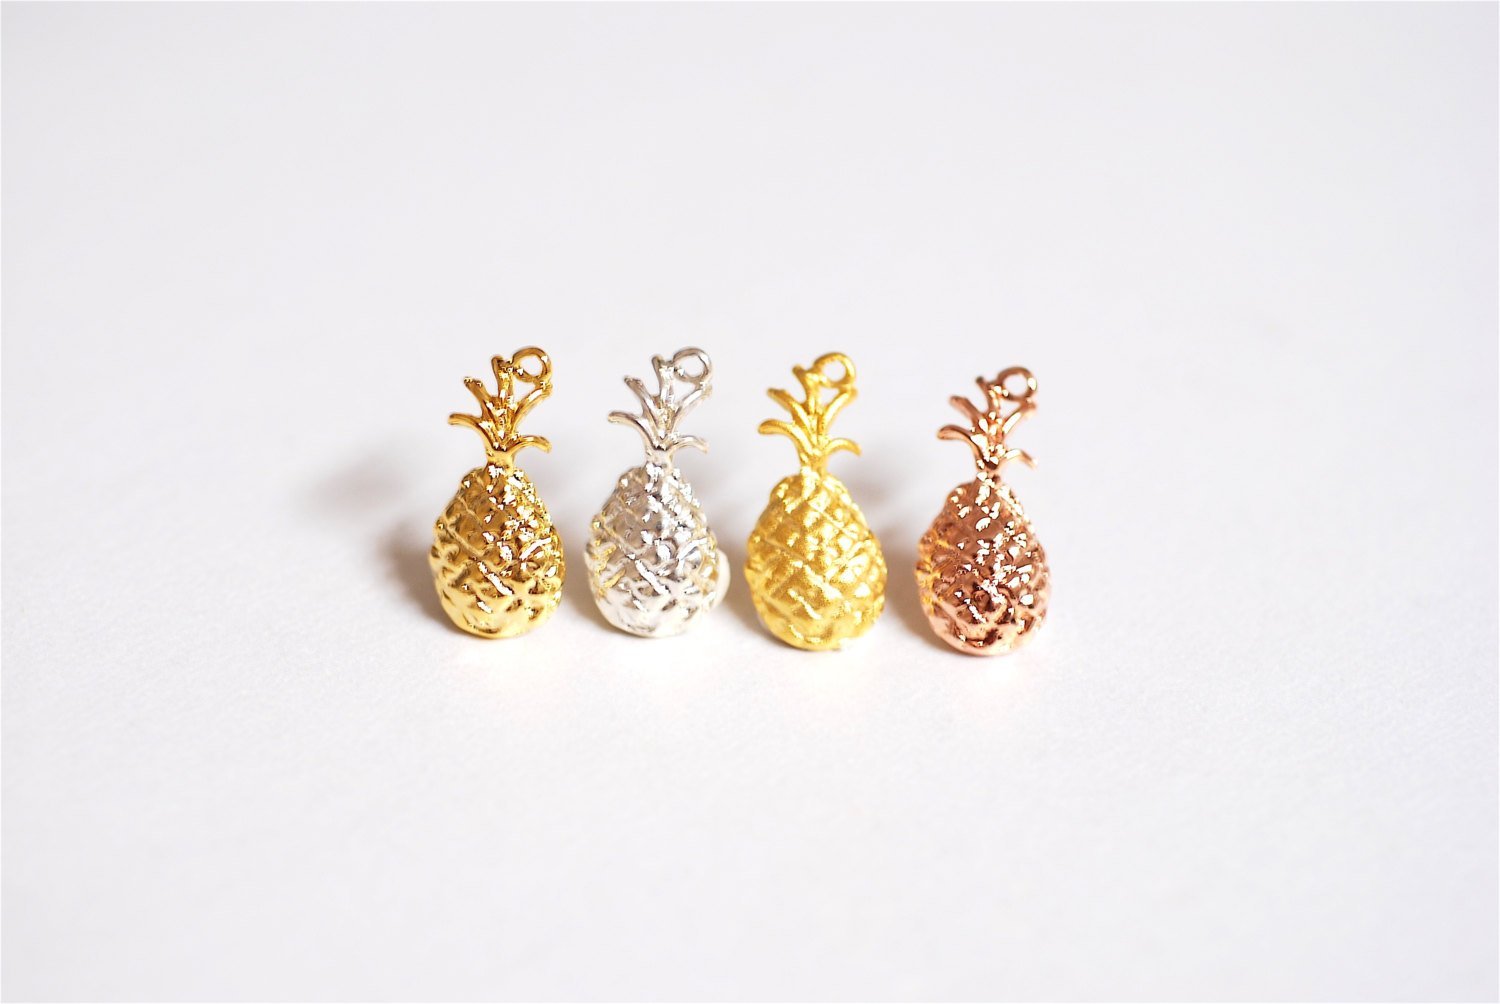 Pink Rose Vermeil Gold Pineapple Charm Pendant- 18k gold plated over Sterling Silver, Hawaiian Pineapple, Pineapple Charm, Fruit Charm, 275 - HarperCrown